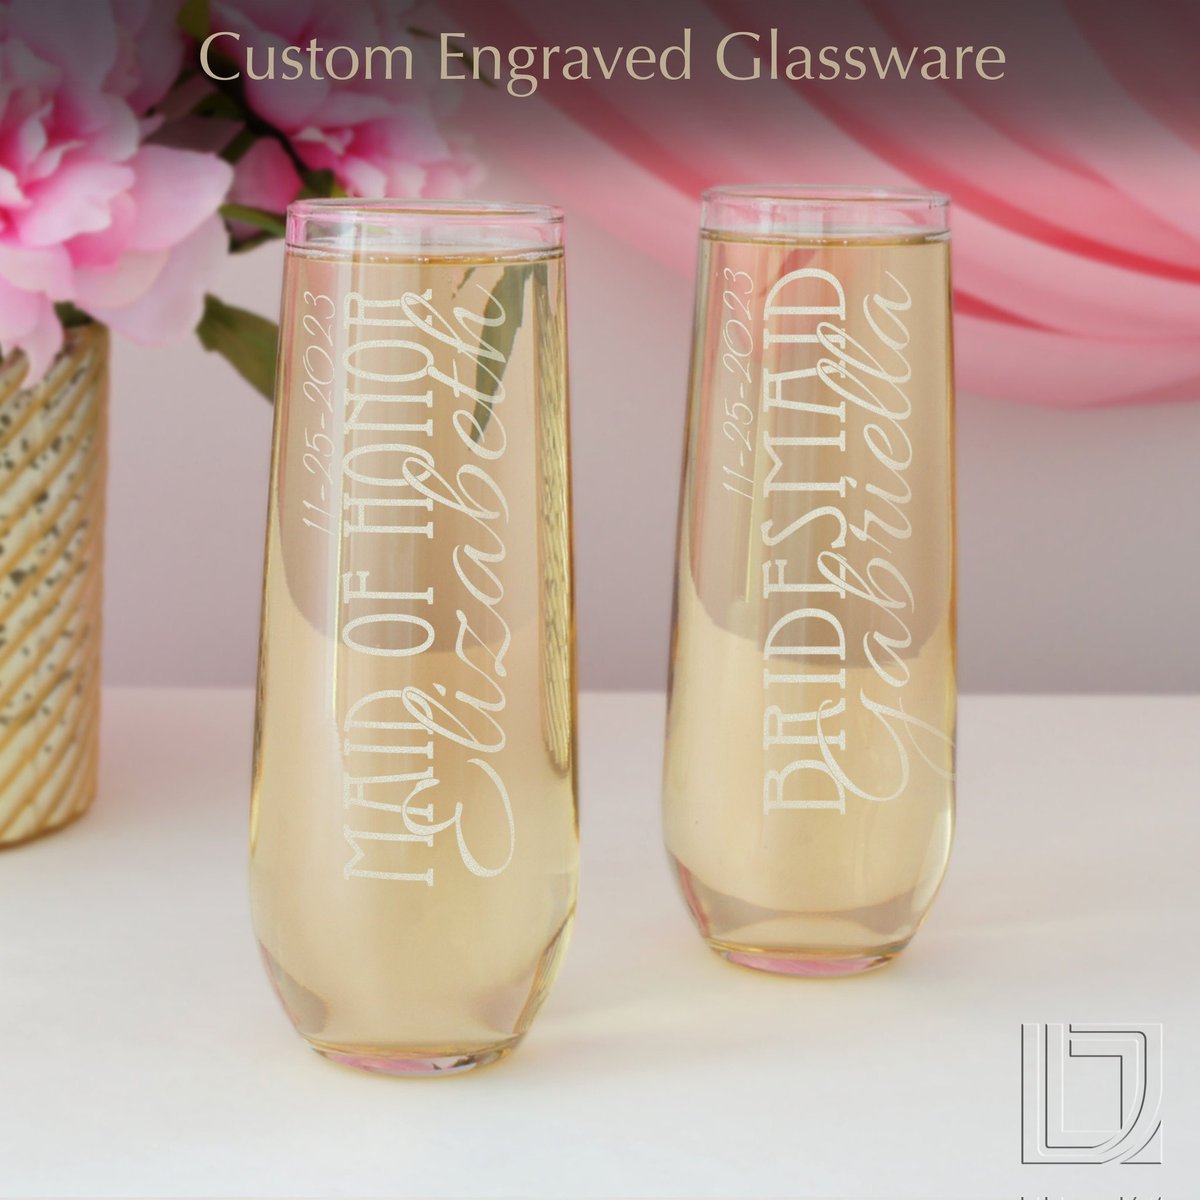 ★★★★★ 'Seller did such an amazing job with these glasses for my bridesmaids! They verified the design prior to them starting the order which was very nice! Excellent work overall, thank you so much!🩷' @DesignstheLimit on Etsy at designsthelimit.etsy.com